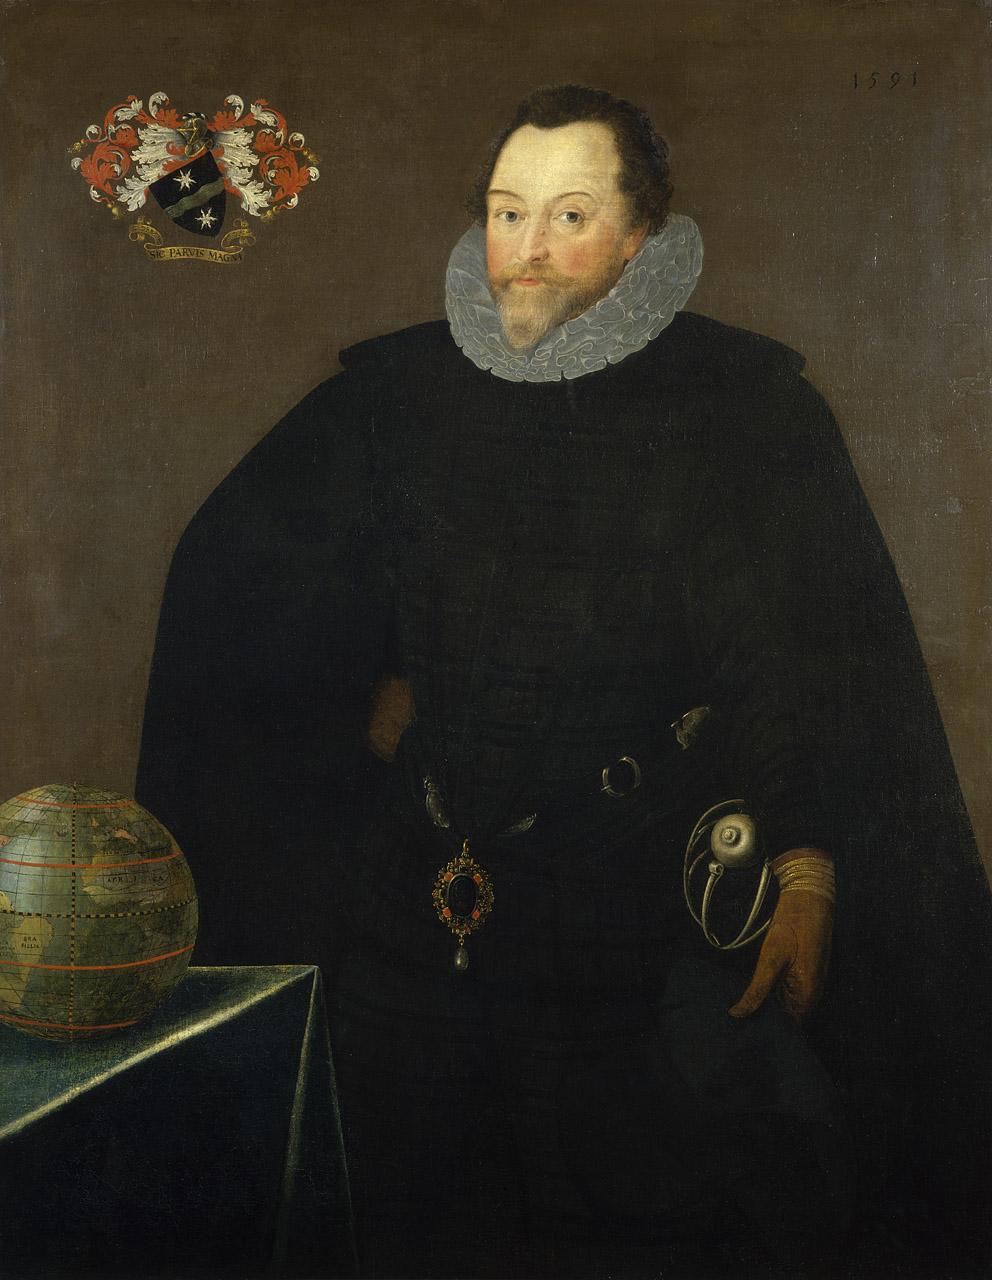 A painting of Sir Francis Drake wearing black with a grey ruff and holding a sword